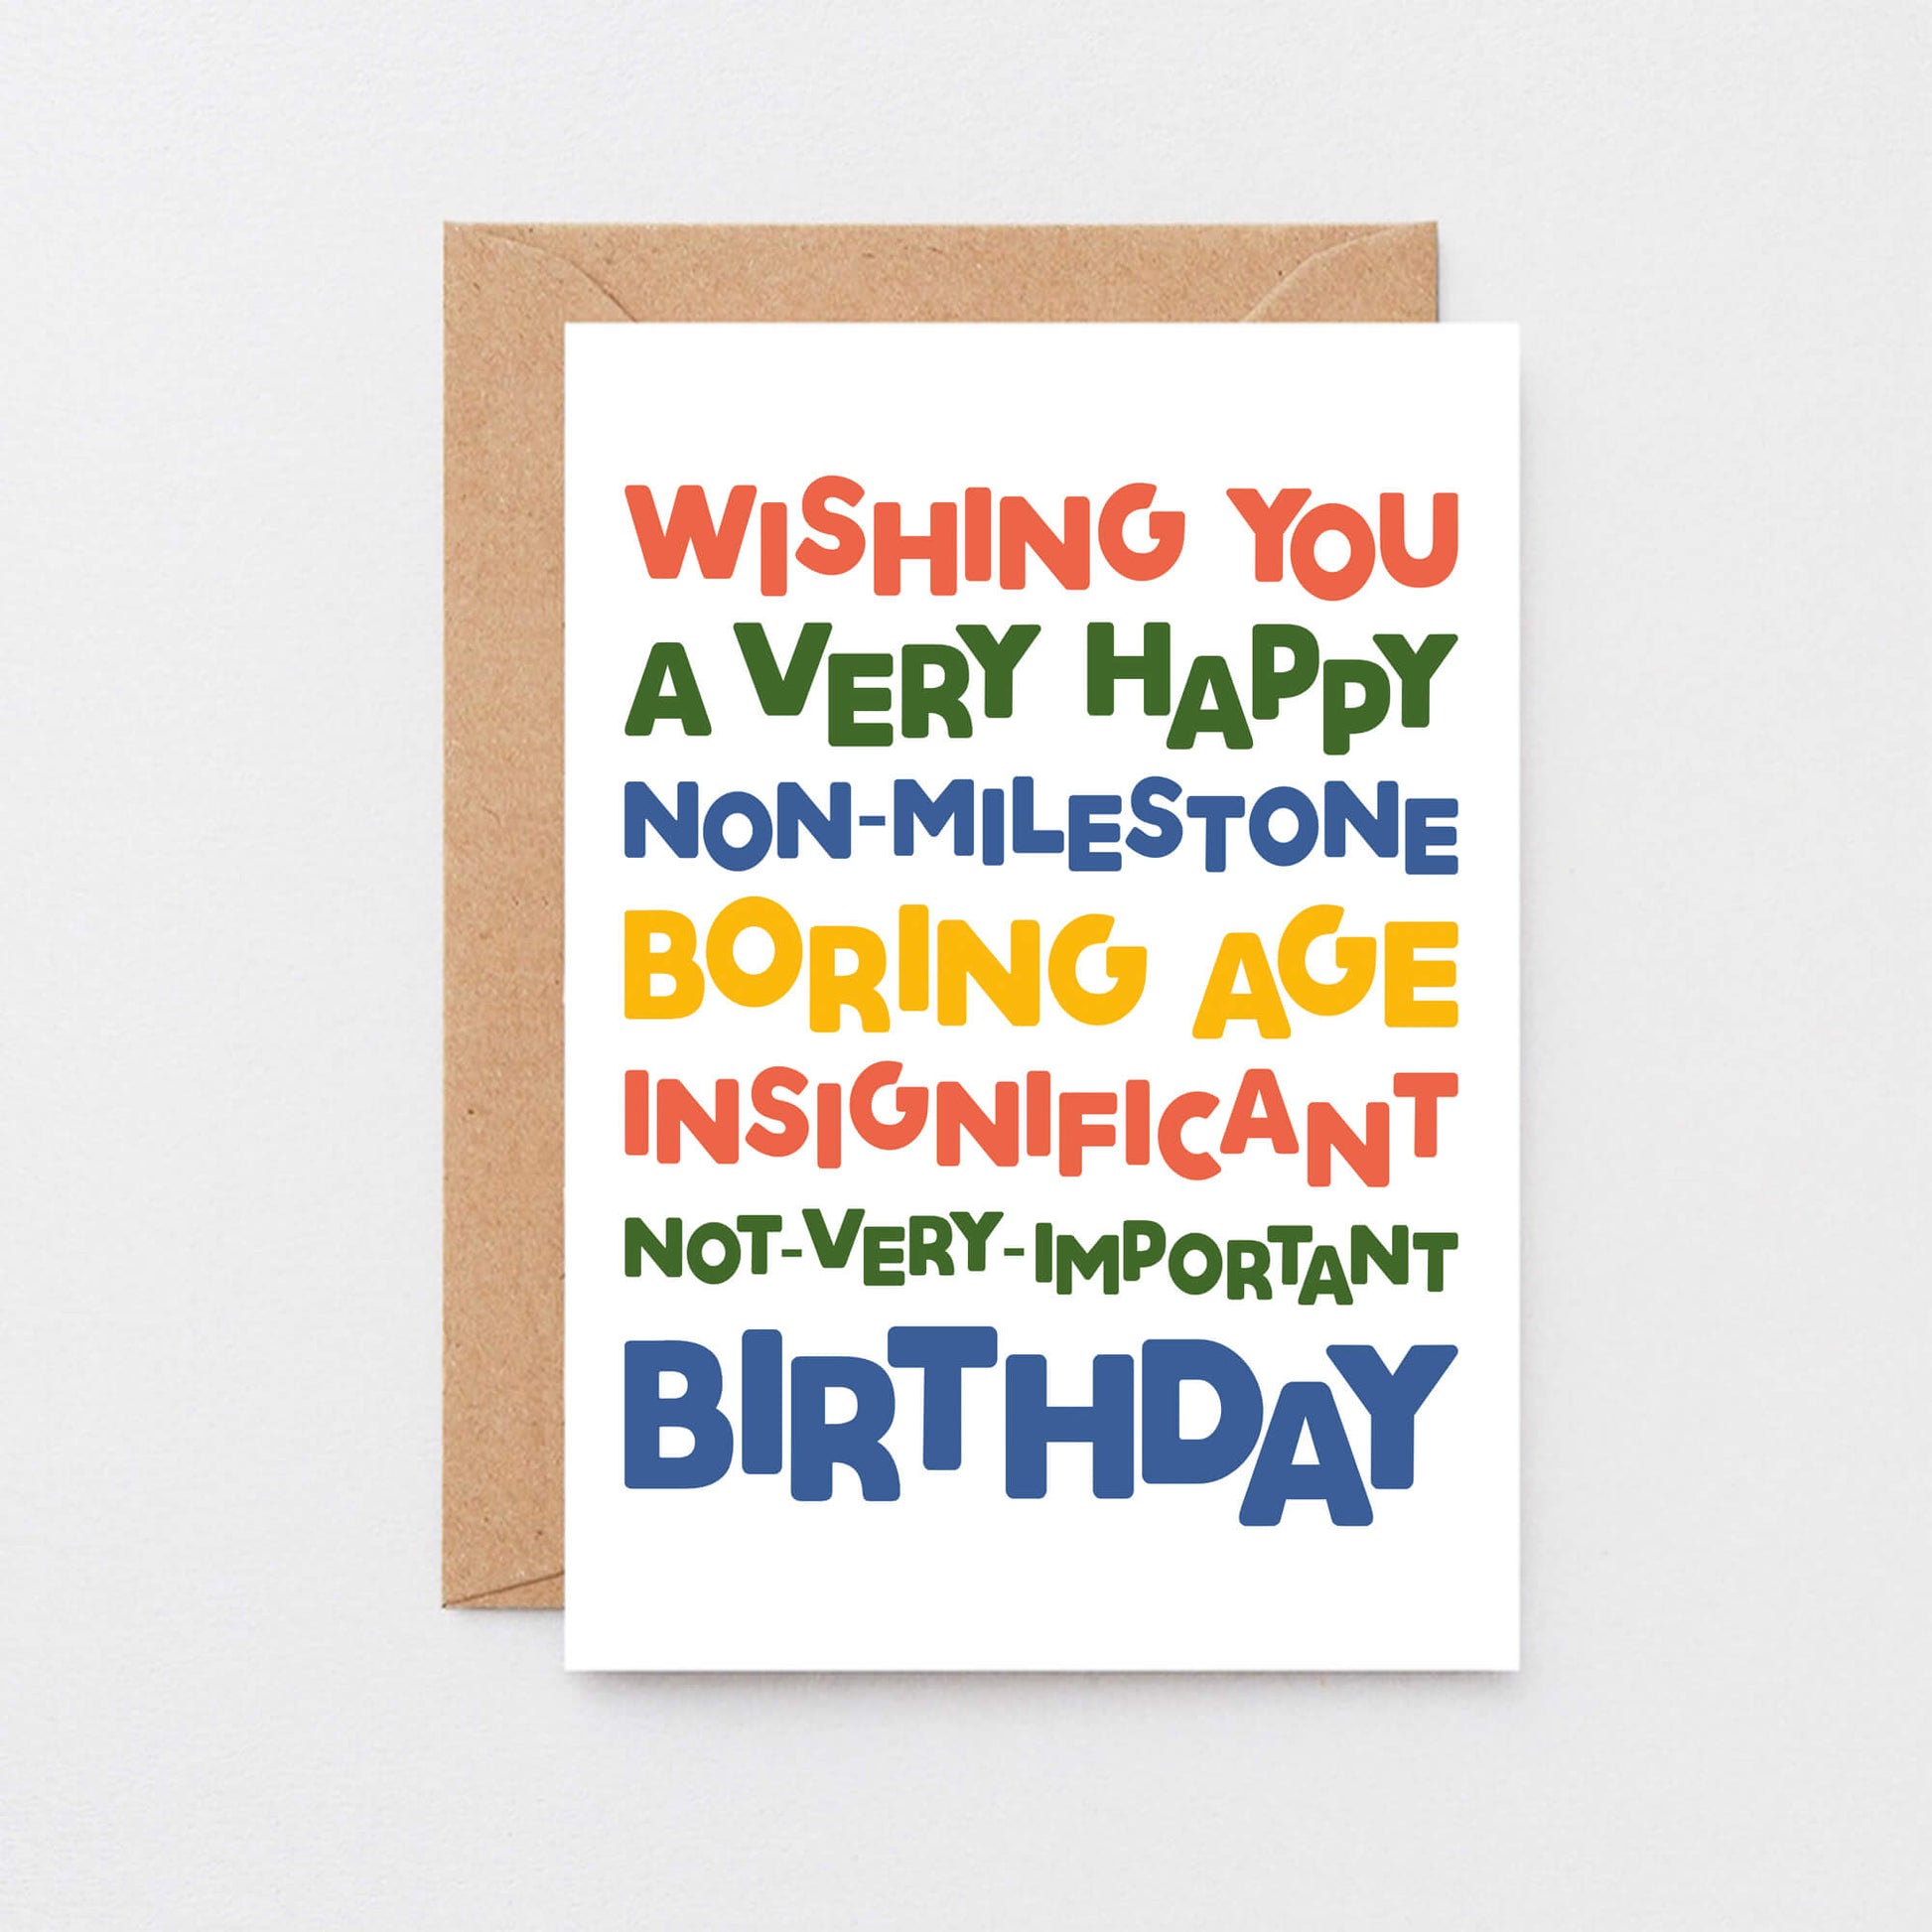 Birthday Card by SixElevenCreations. Reads Wishing you a very happy non-milestone boring age insignificant not-very-important birthday. Product Code SE0701A6